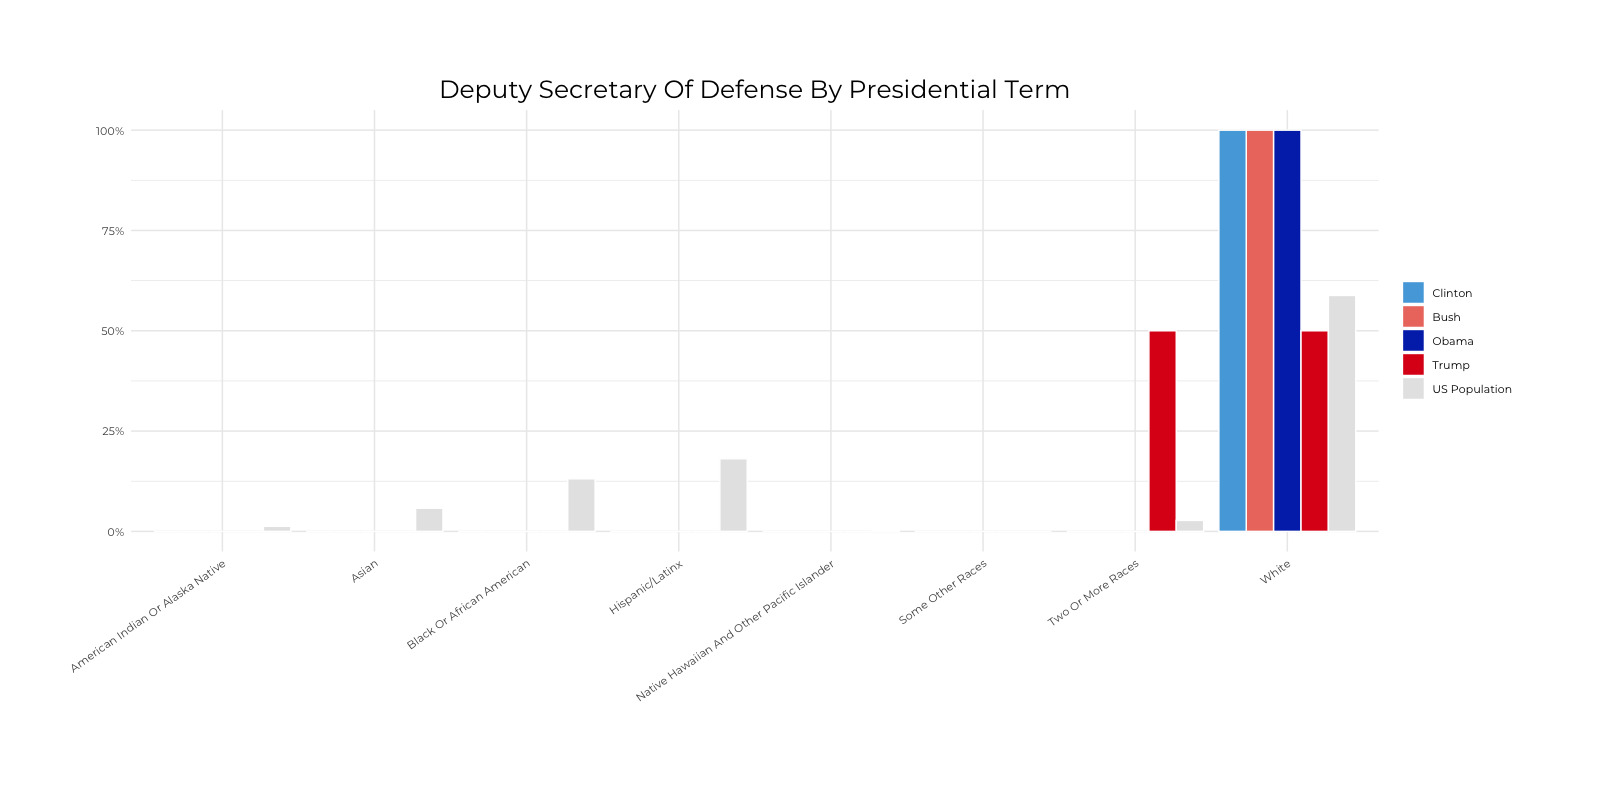 Graph about Racial Composition Comparison of Deputy Secretary of Defense by Presidential Terms. More detailed text description below.